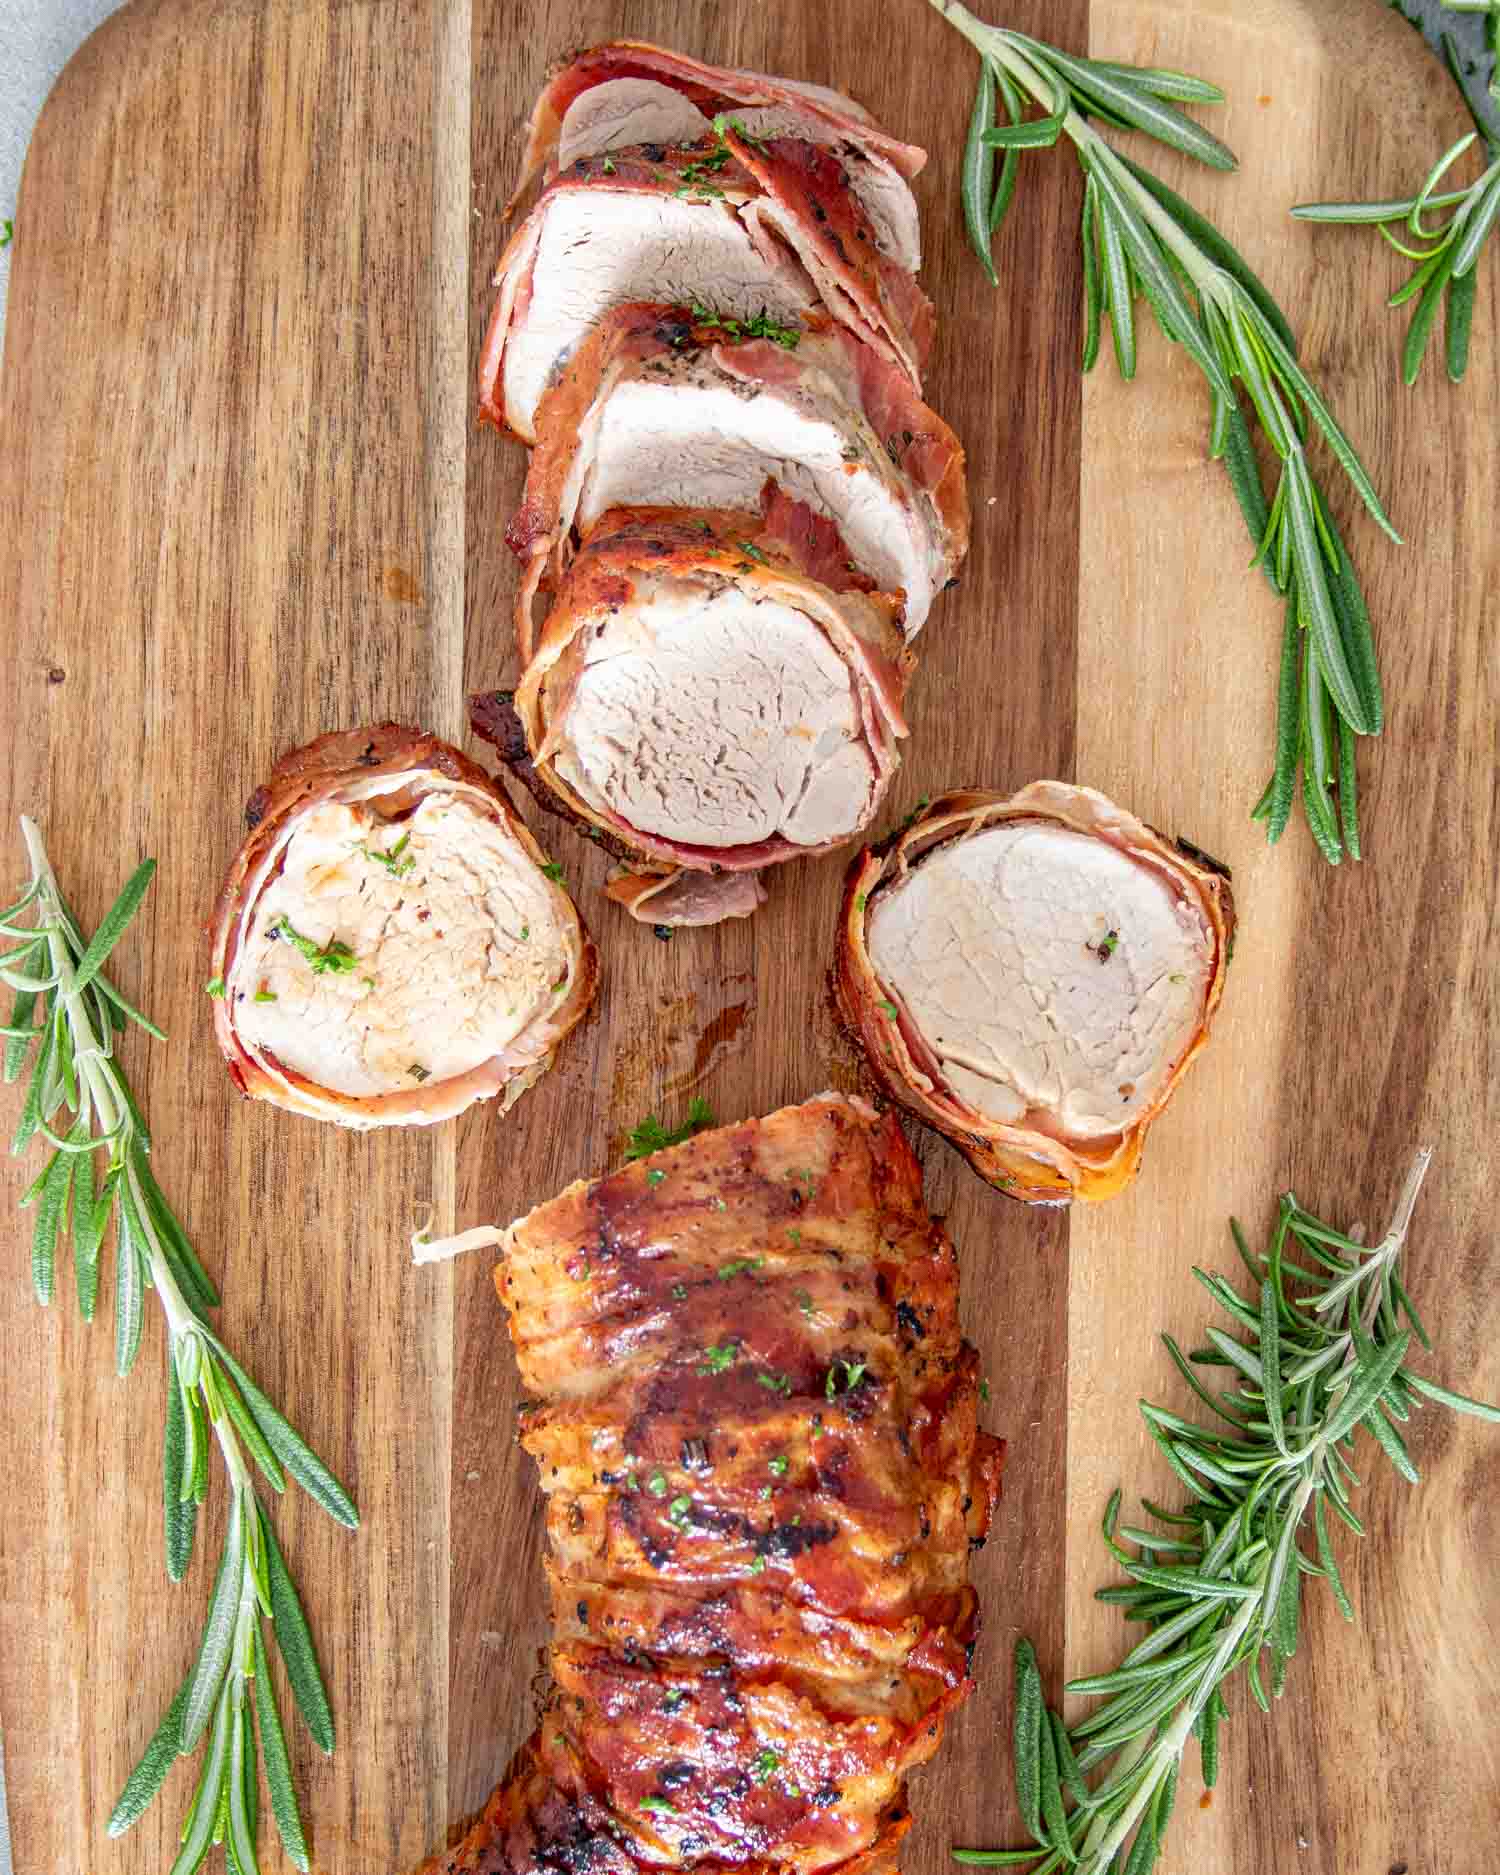 a bacon wrapped pork tenderloin cut up in slices on a cutting board along some fresh rosemary.